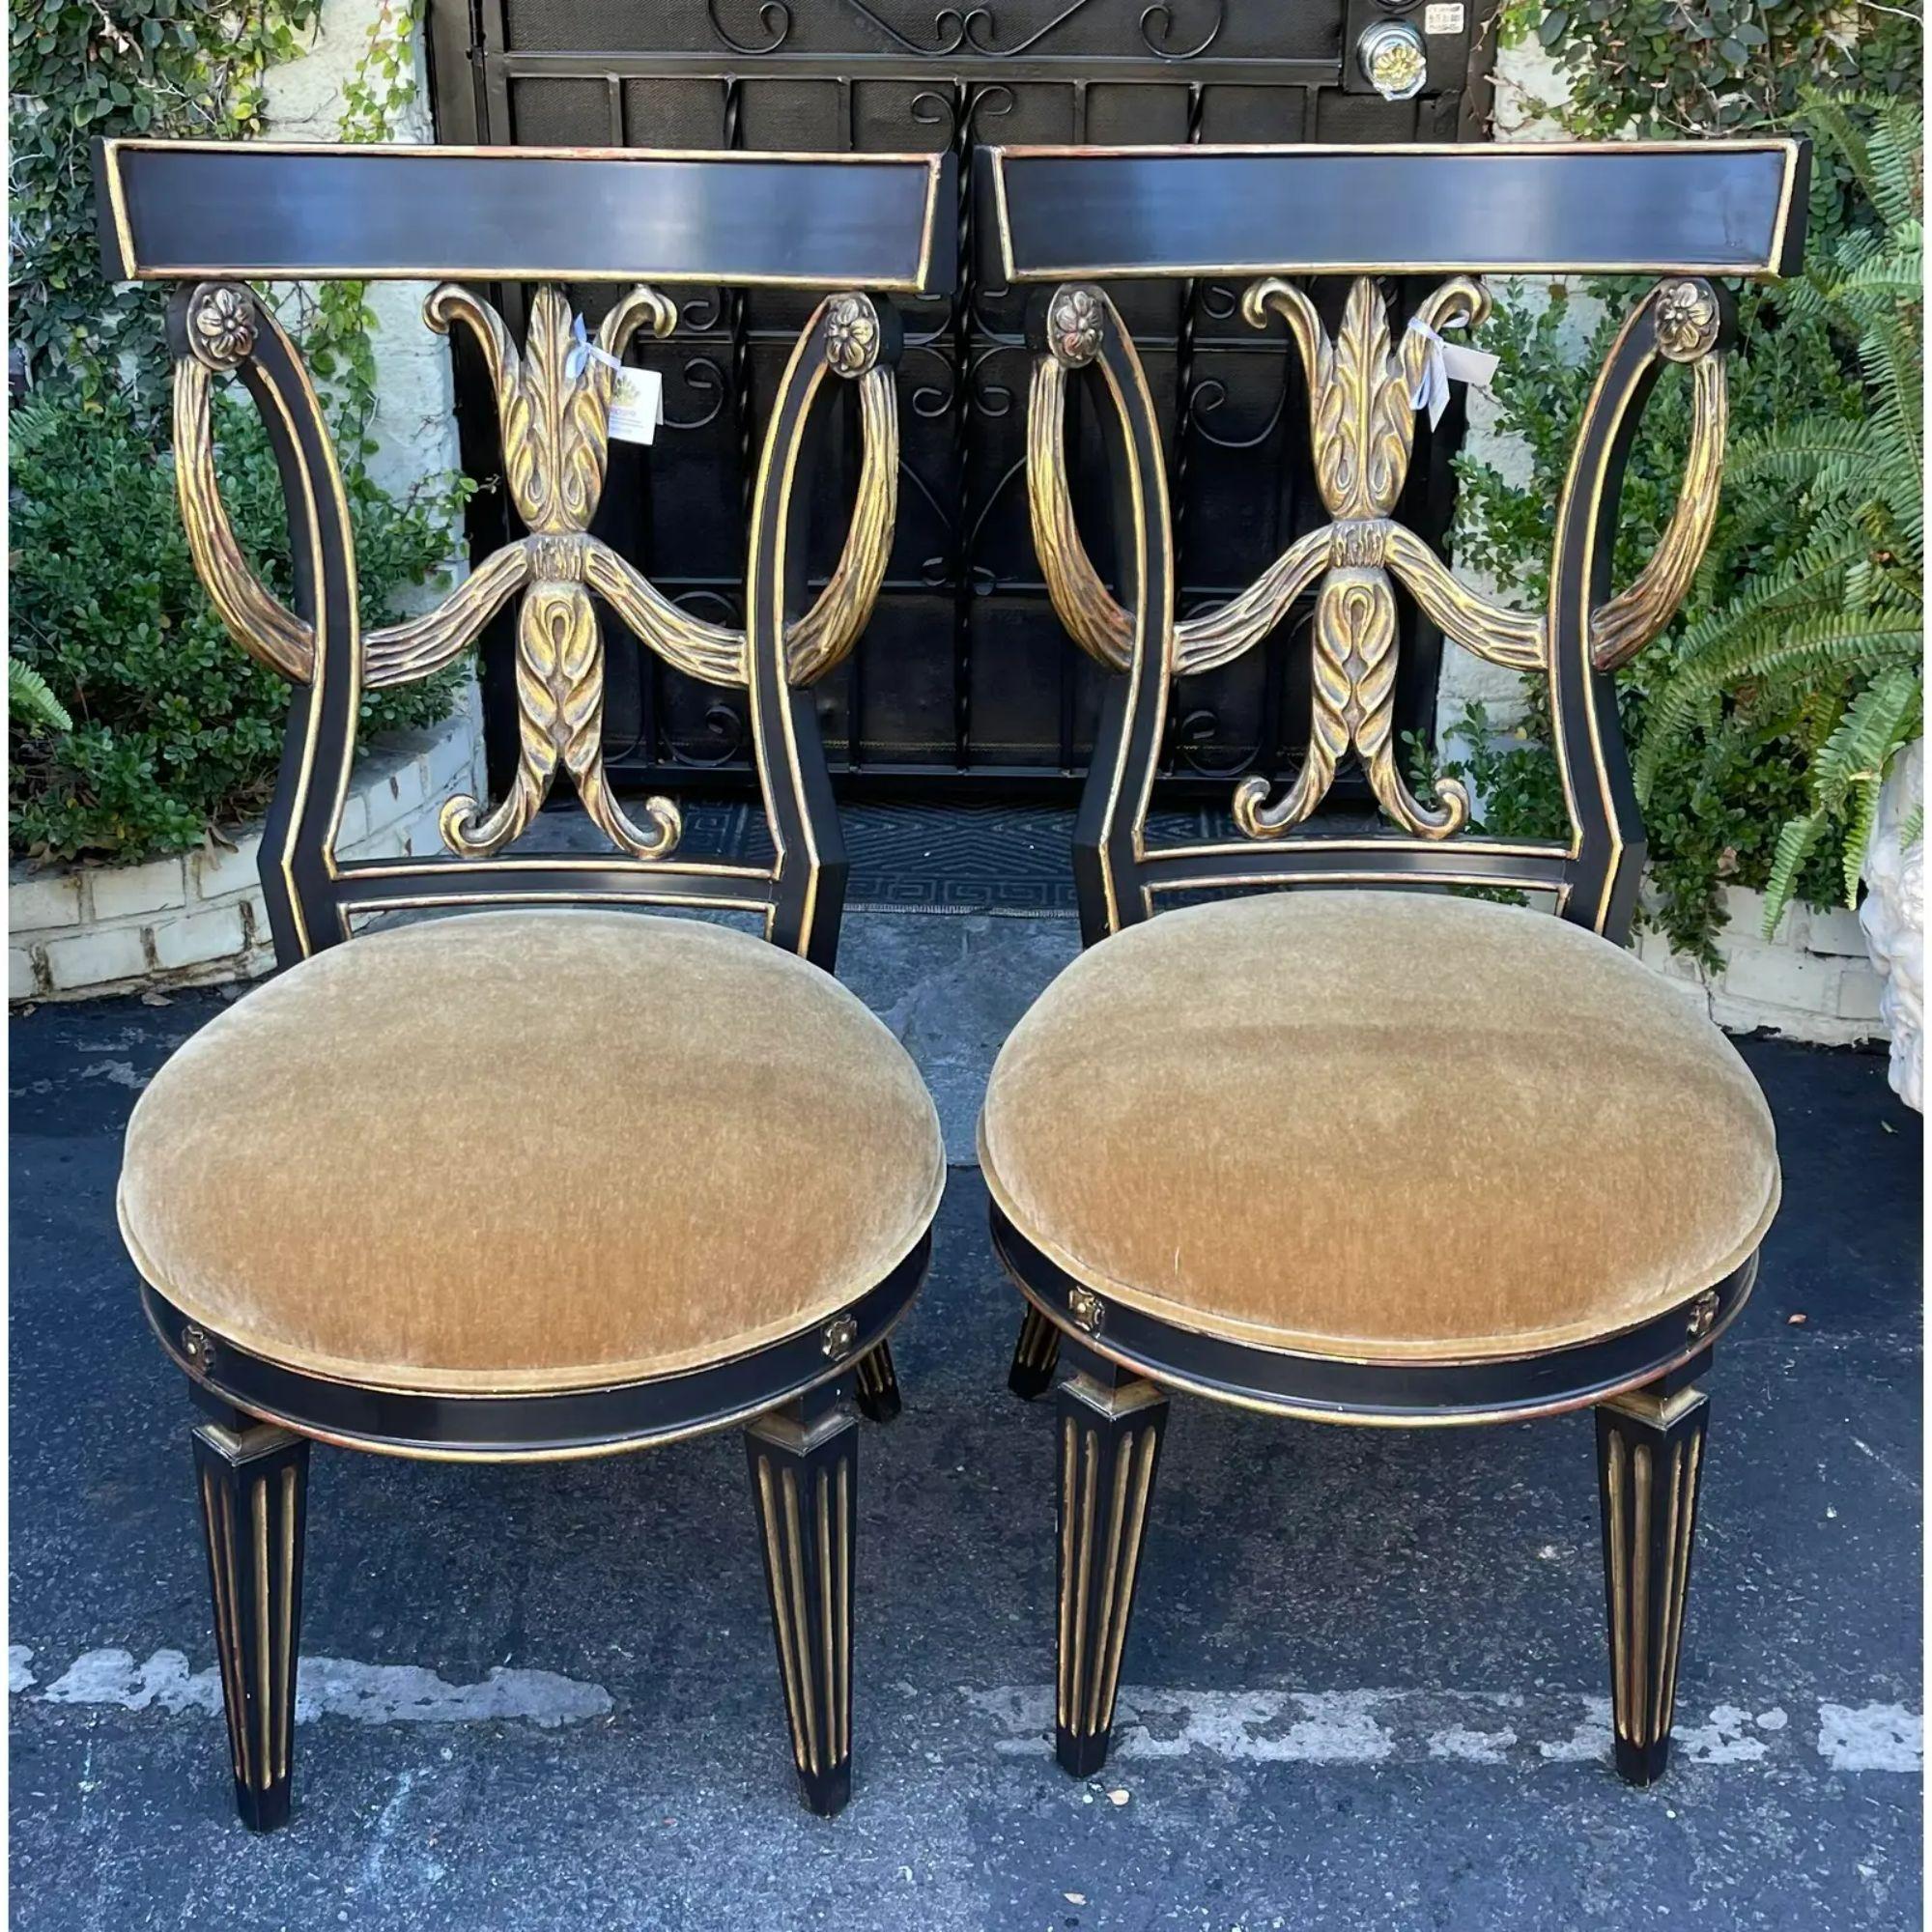 Contemporary Pair of Regency Style Giltwood & Mohair Chairs by Randy Esada Designs for Prospr For Sale